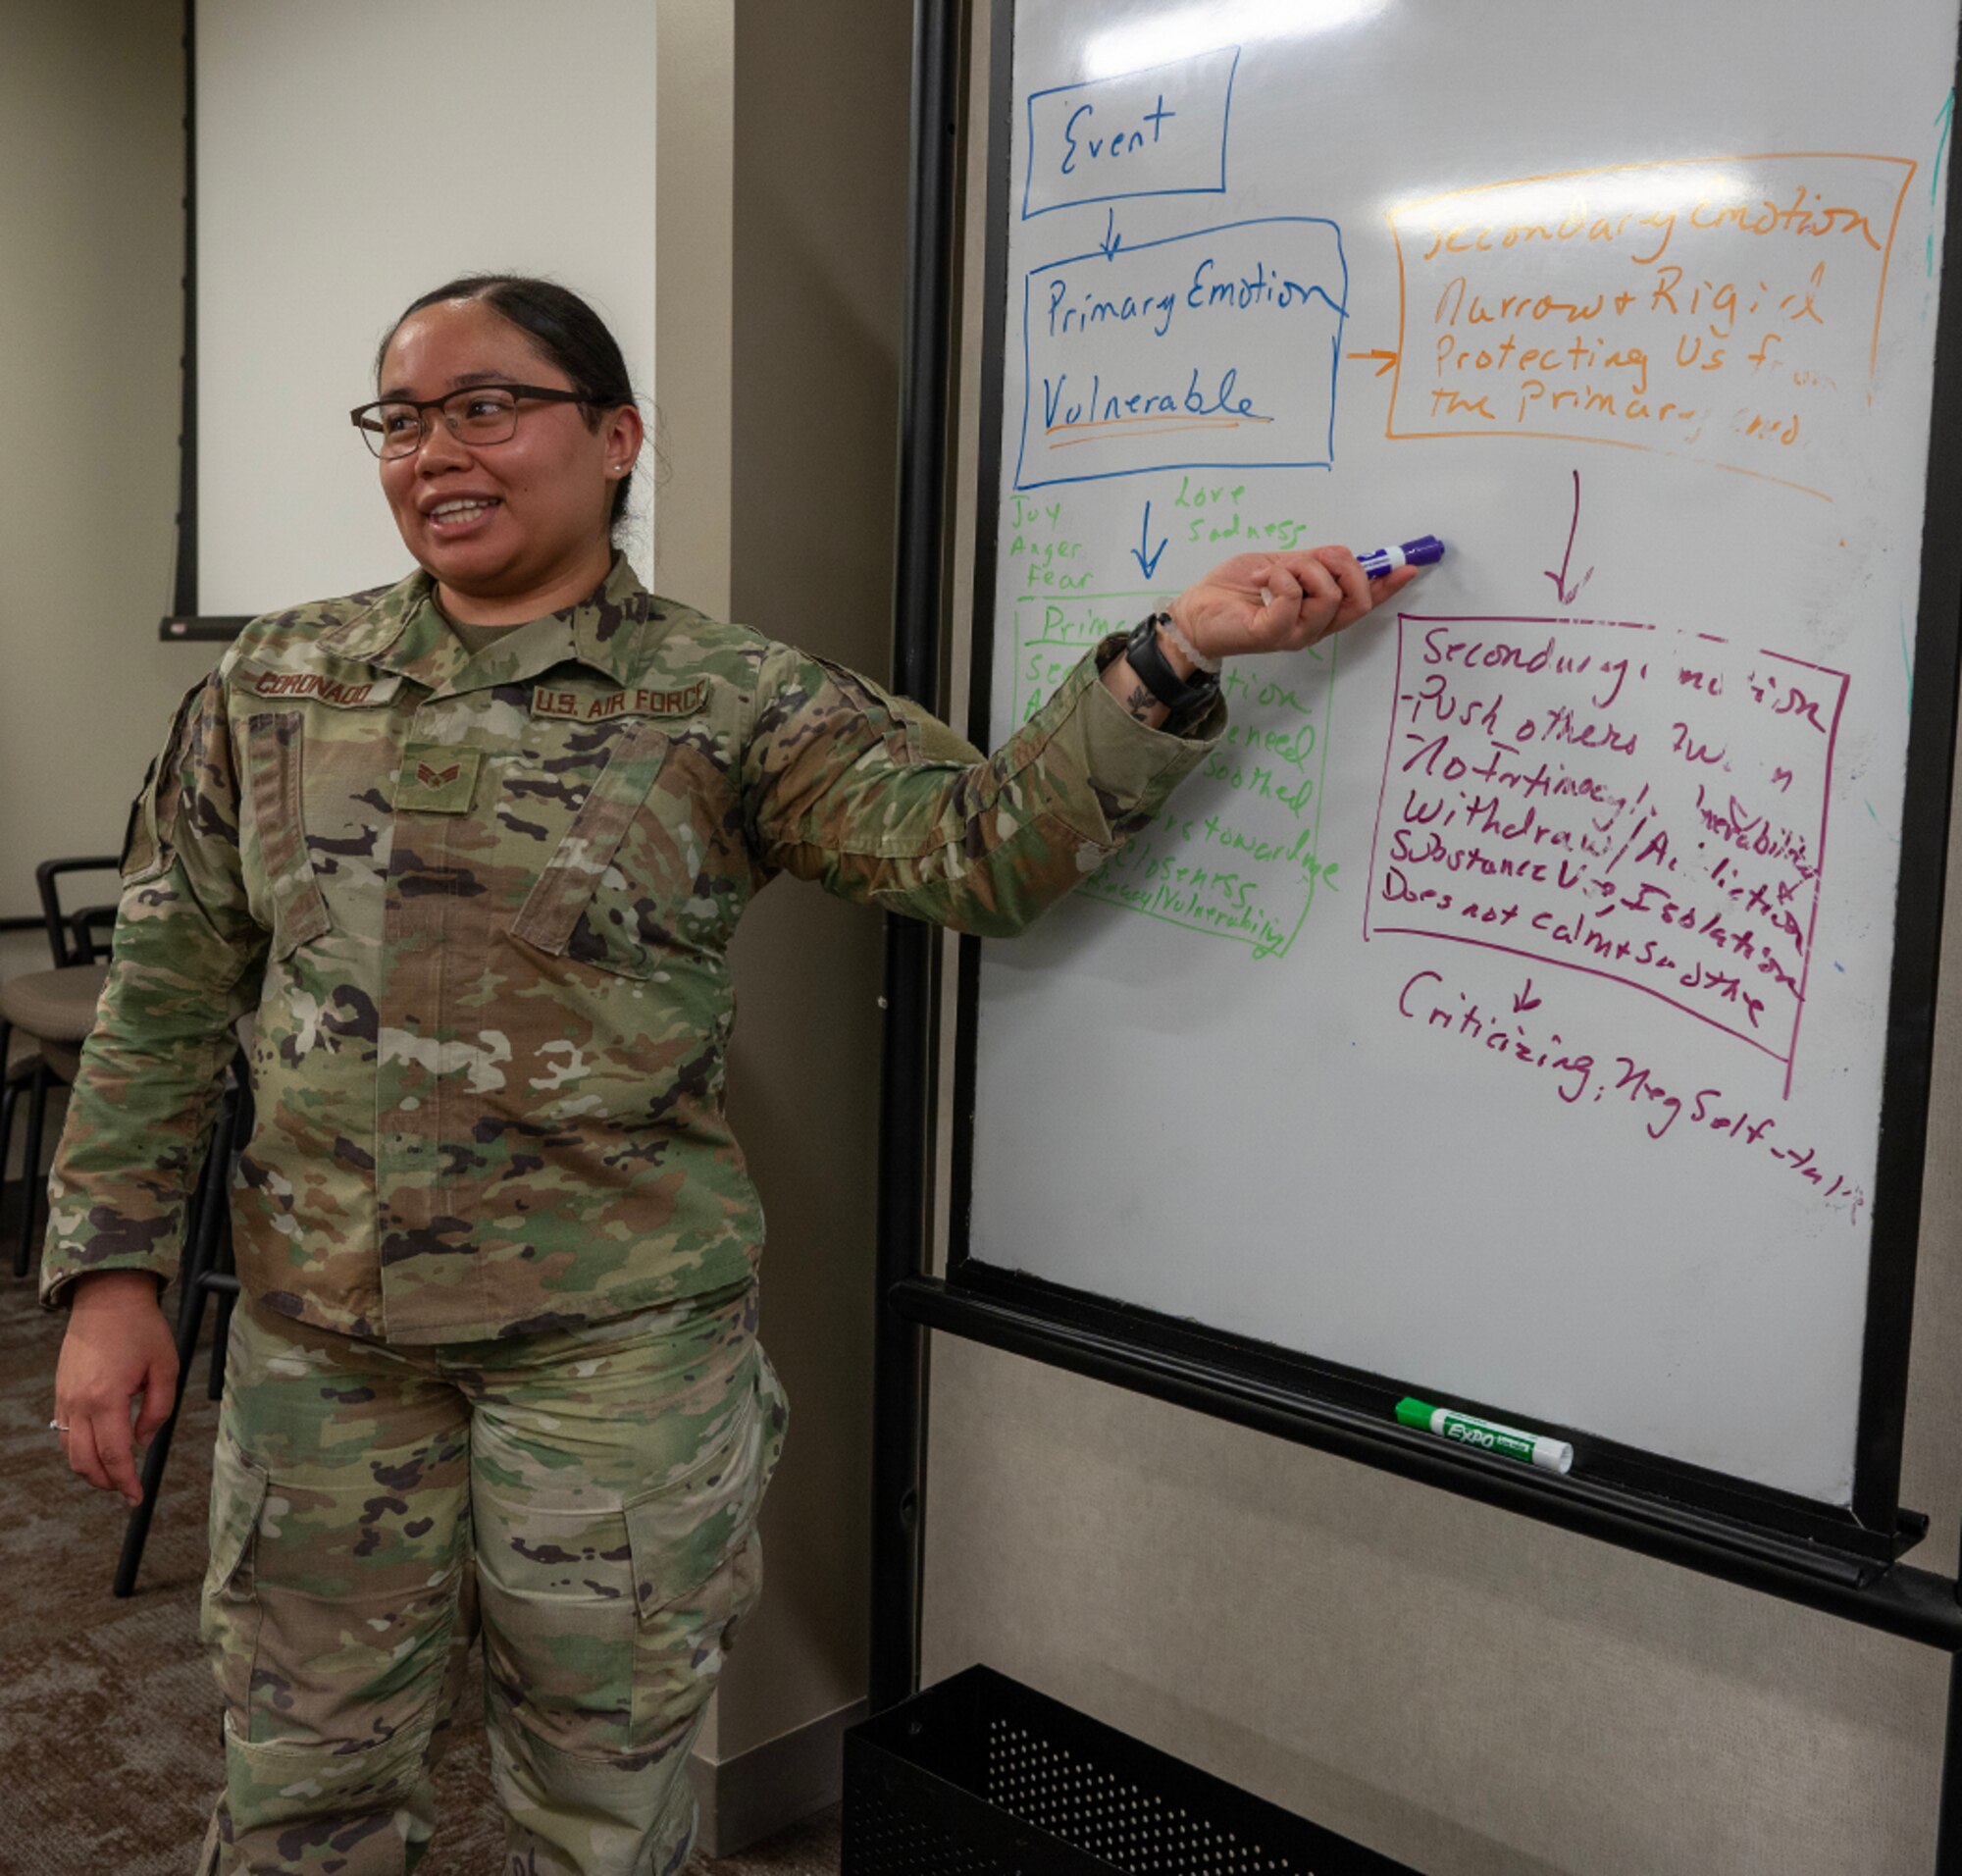 59th MDW: Mental Health impacts readiness